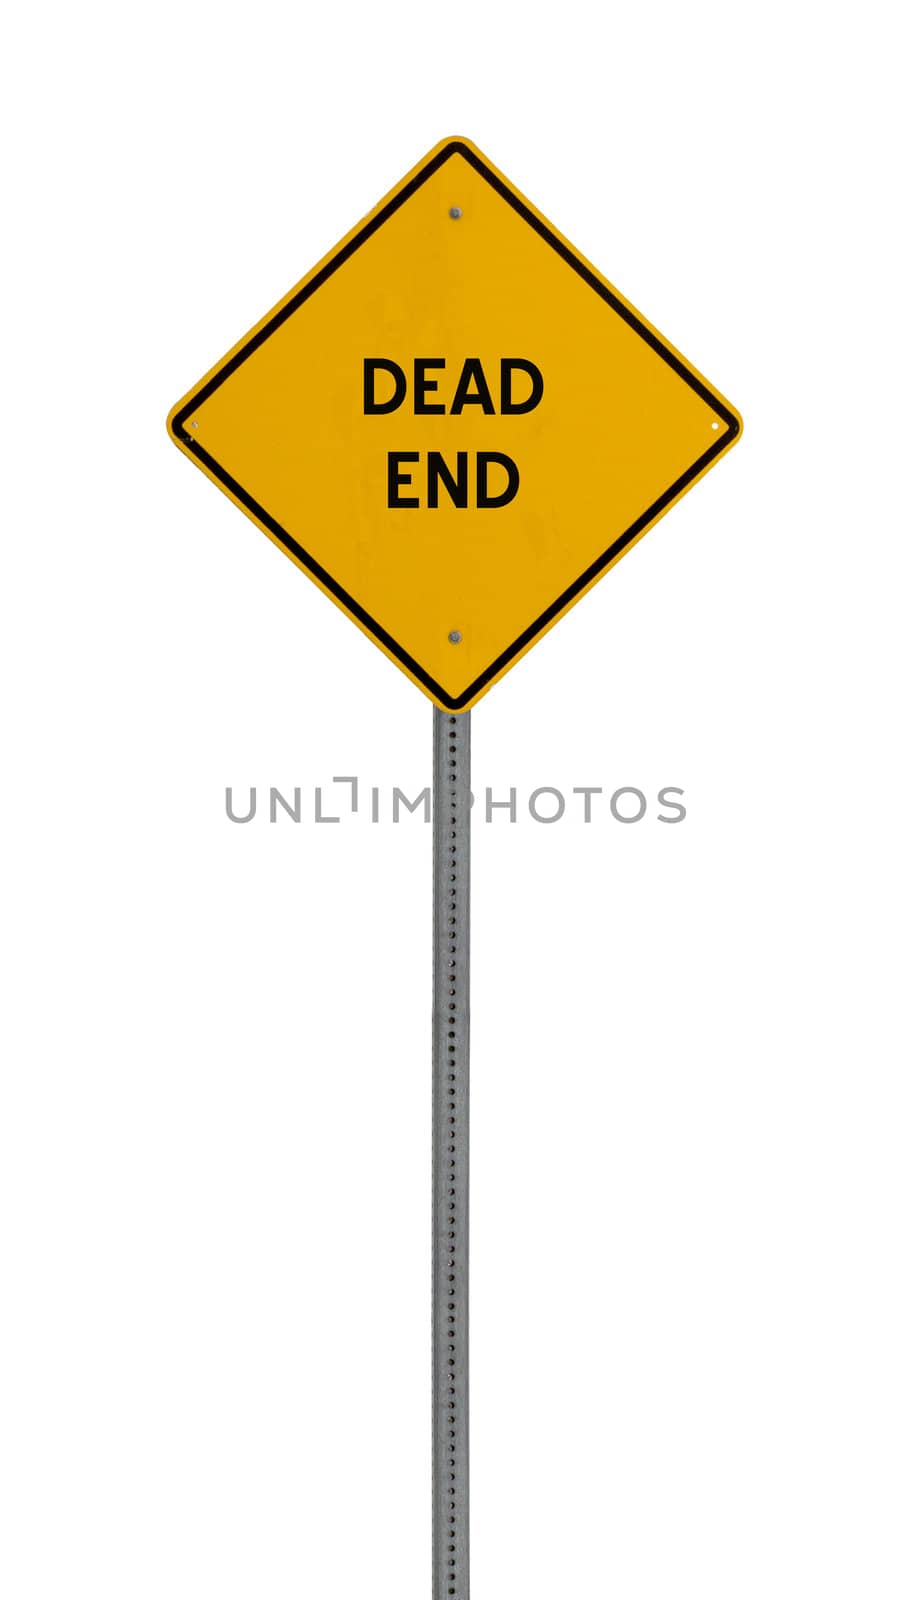 A high quality road sign